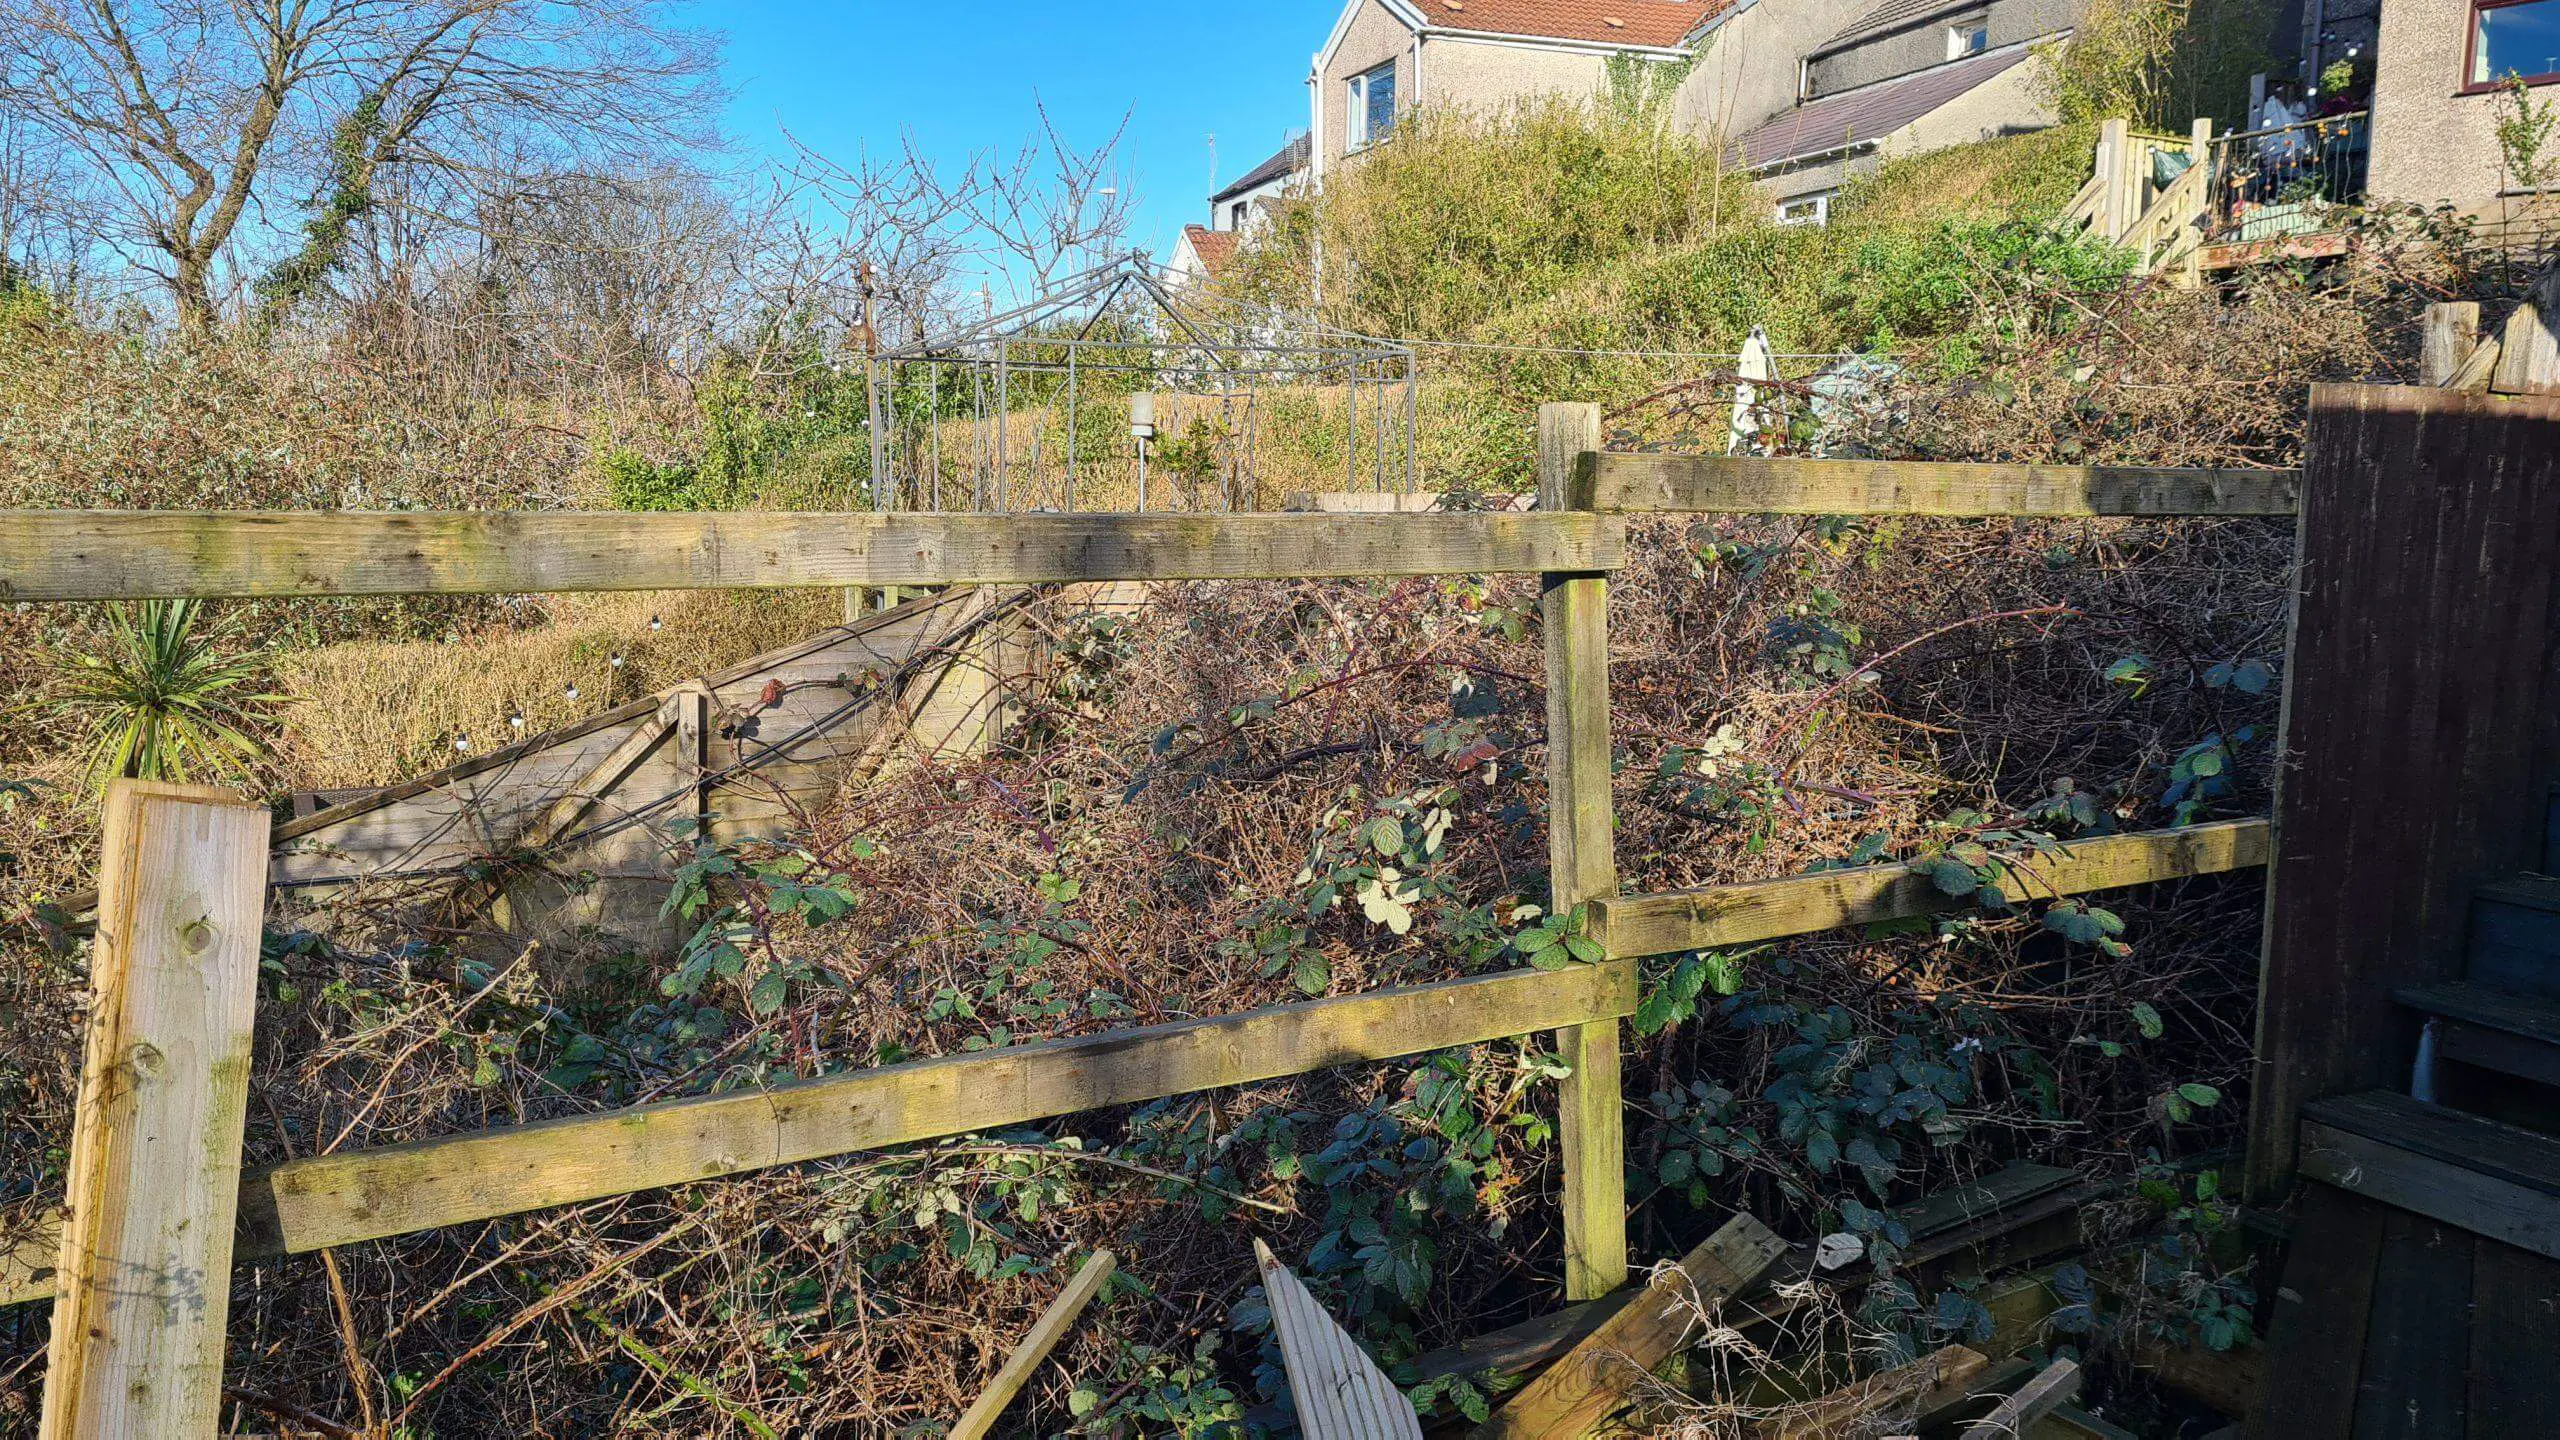 Brambles have consumed a garden and forced the fence between neighbours to fall down